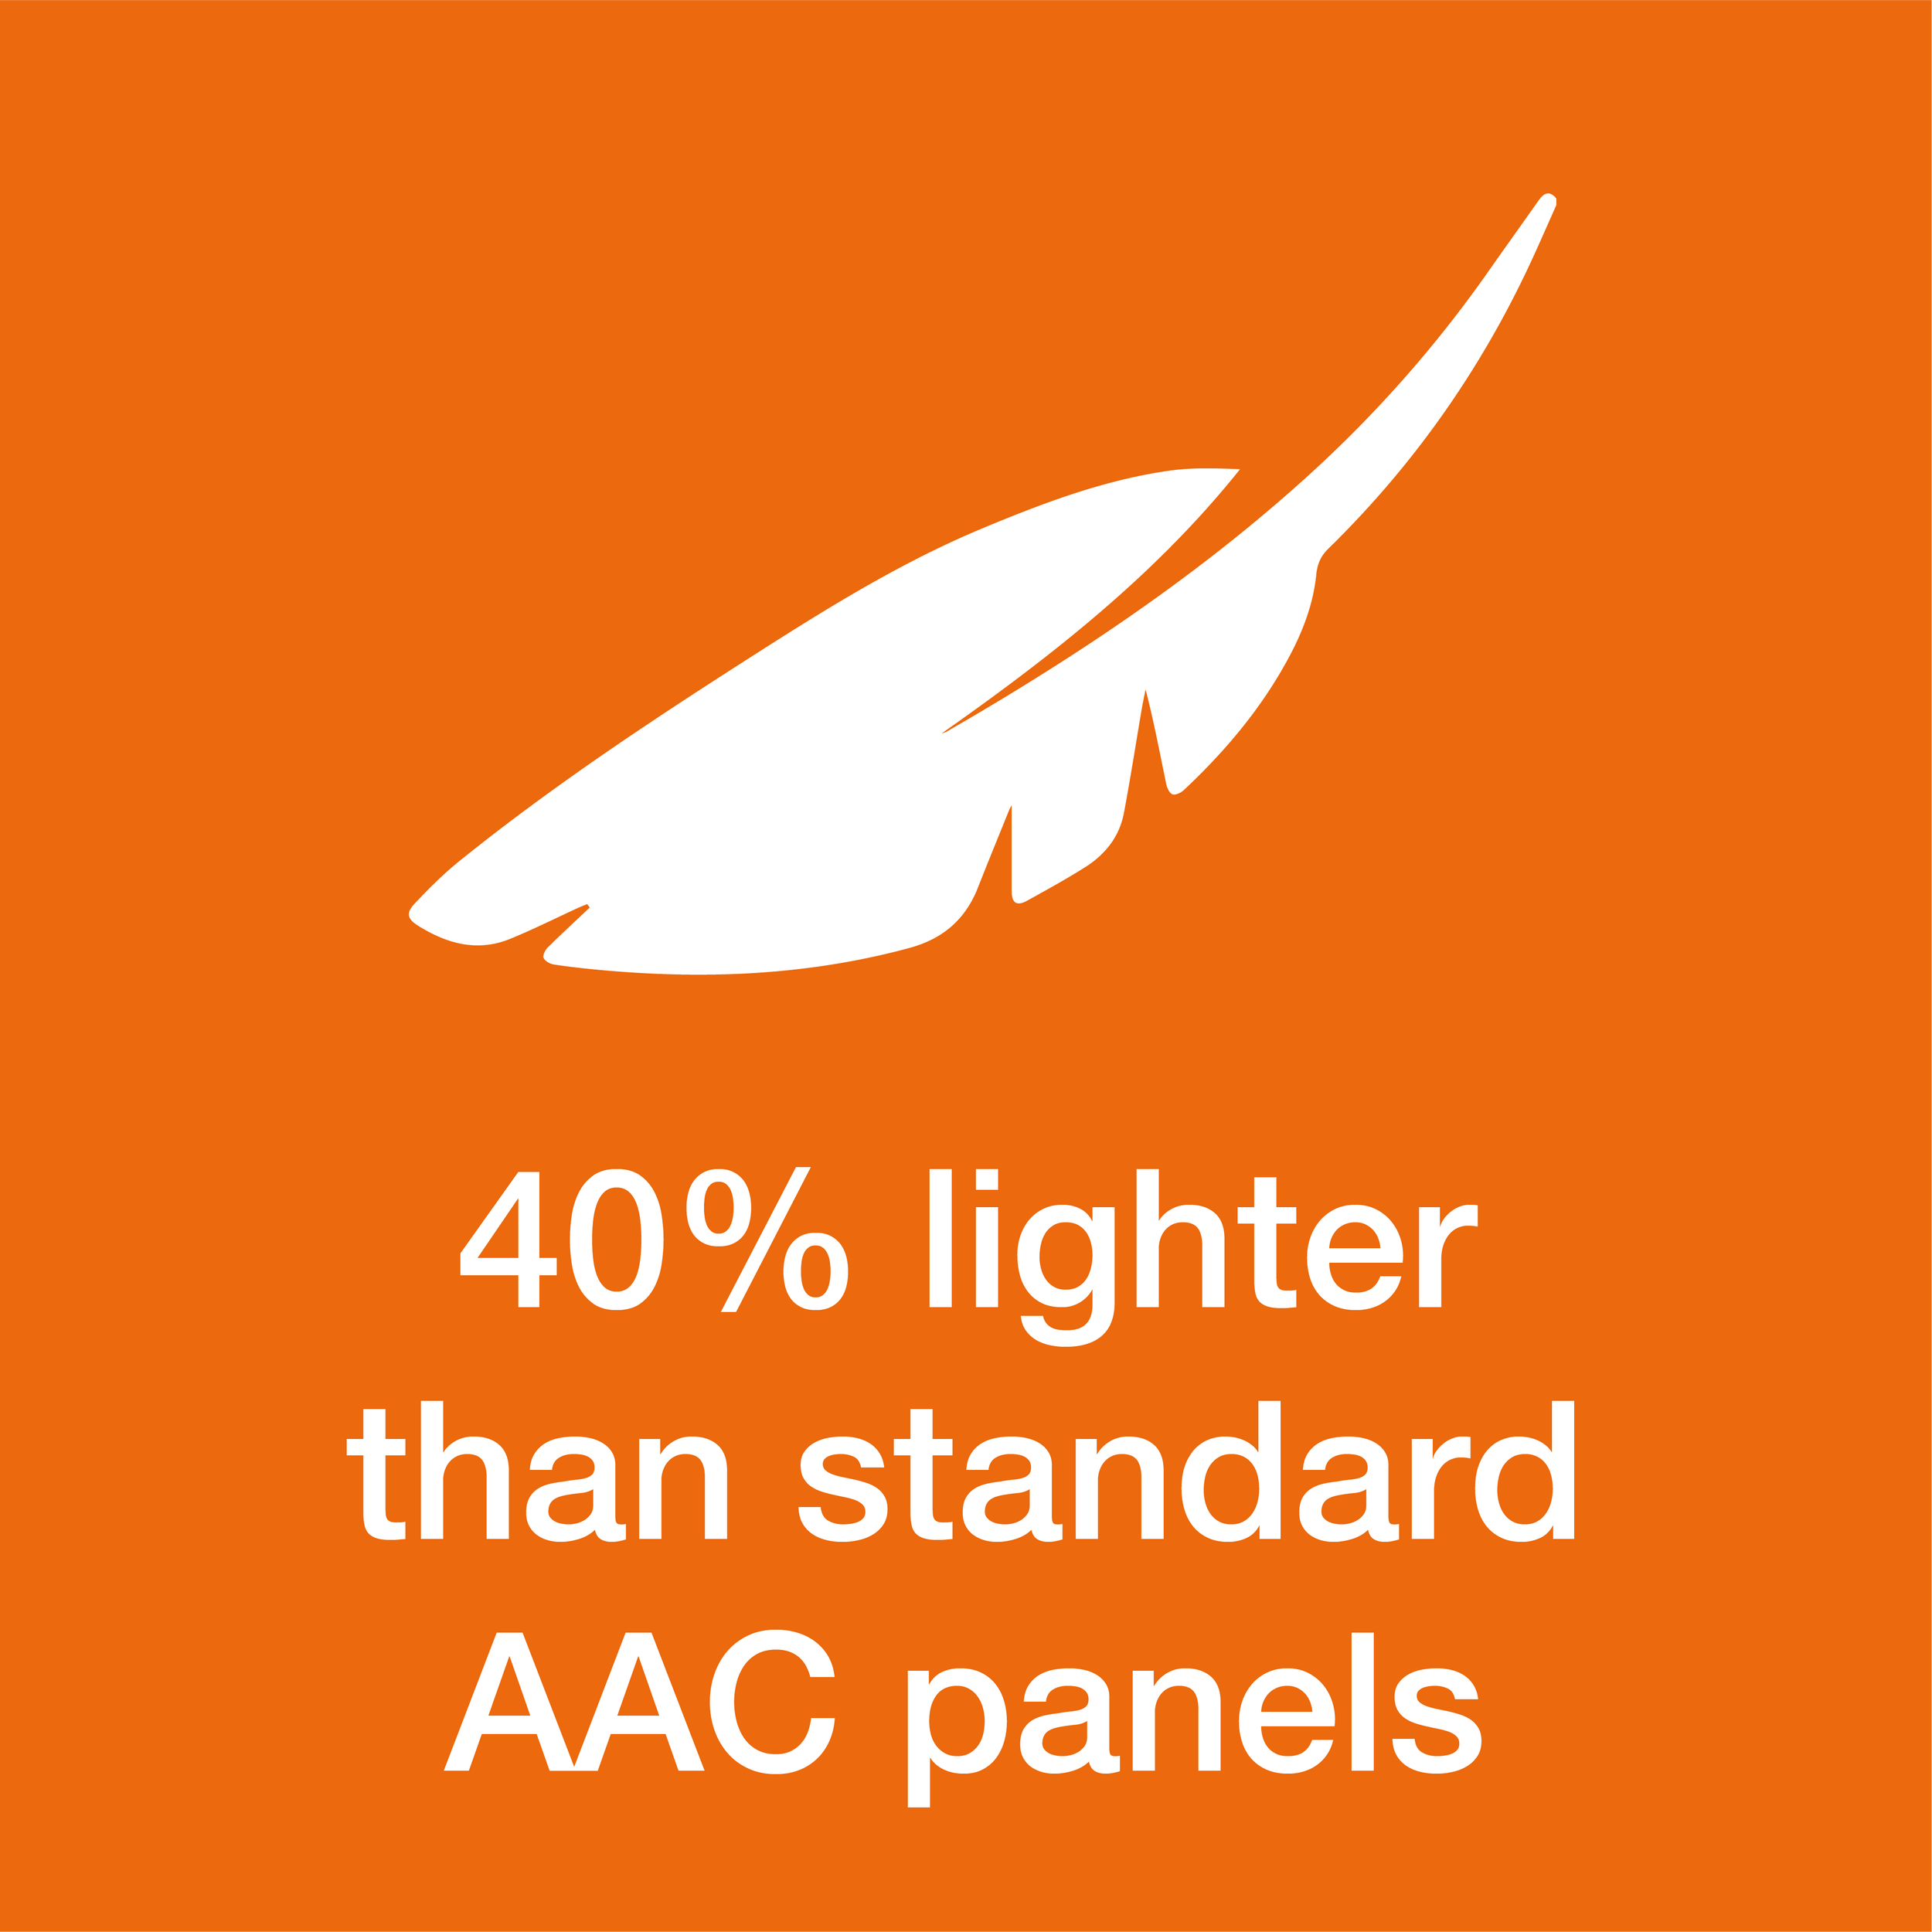  Geneus37 is 40% lighter than any other AAC panels. 